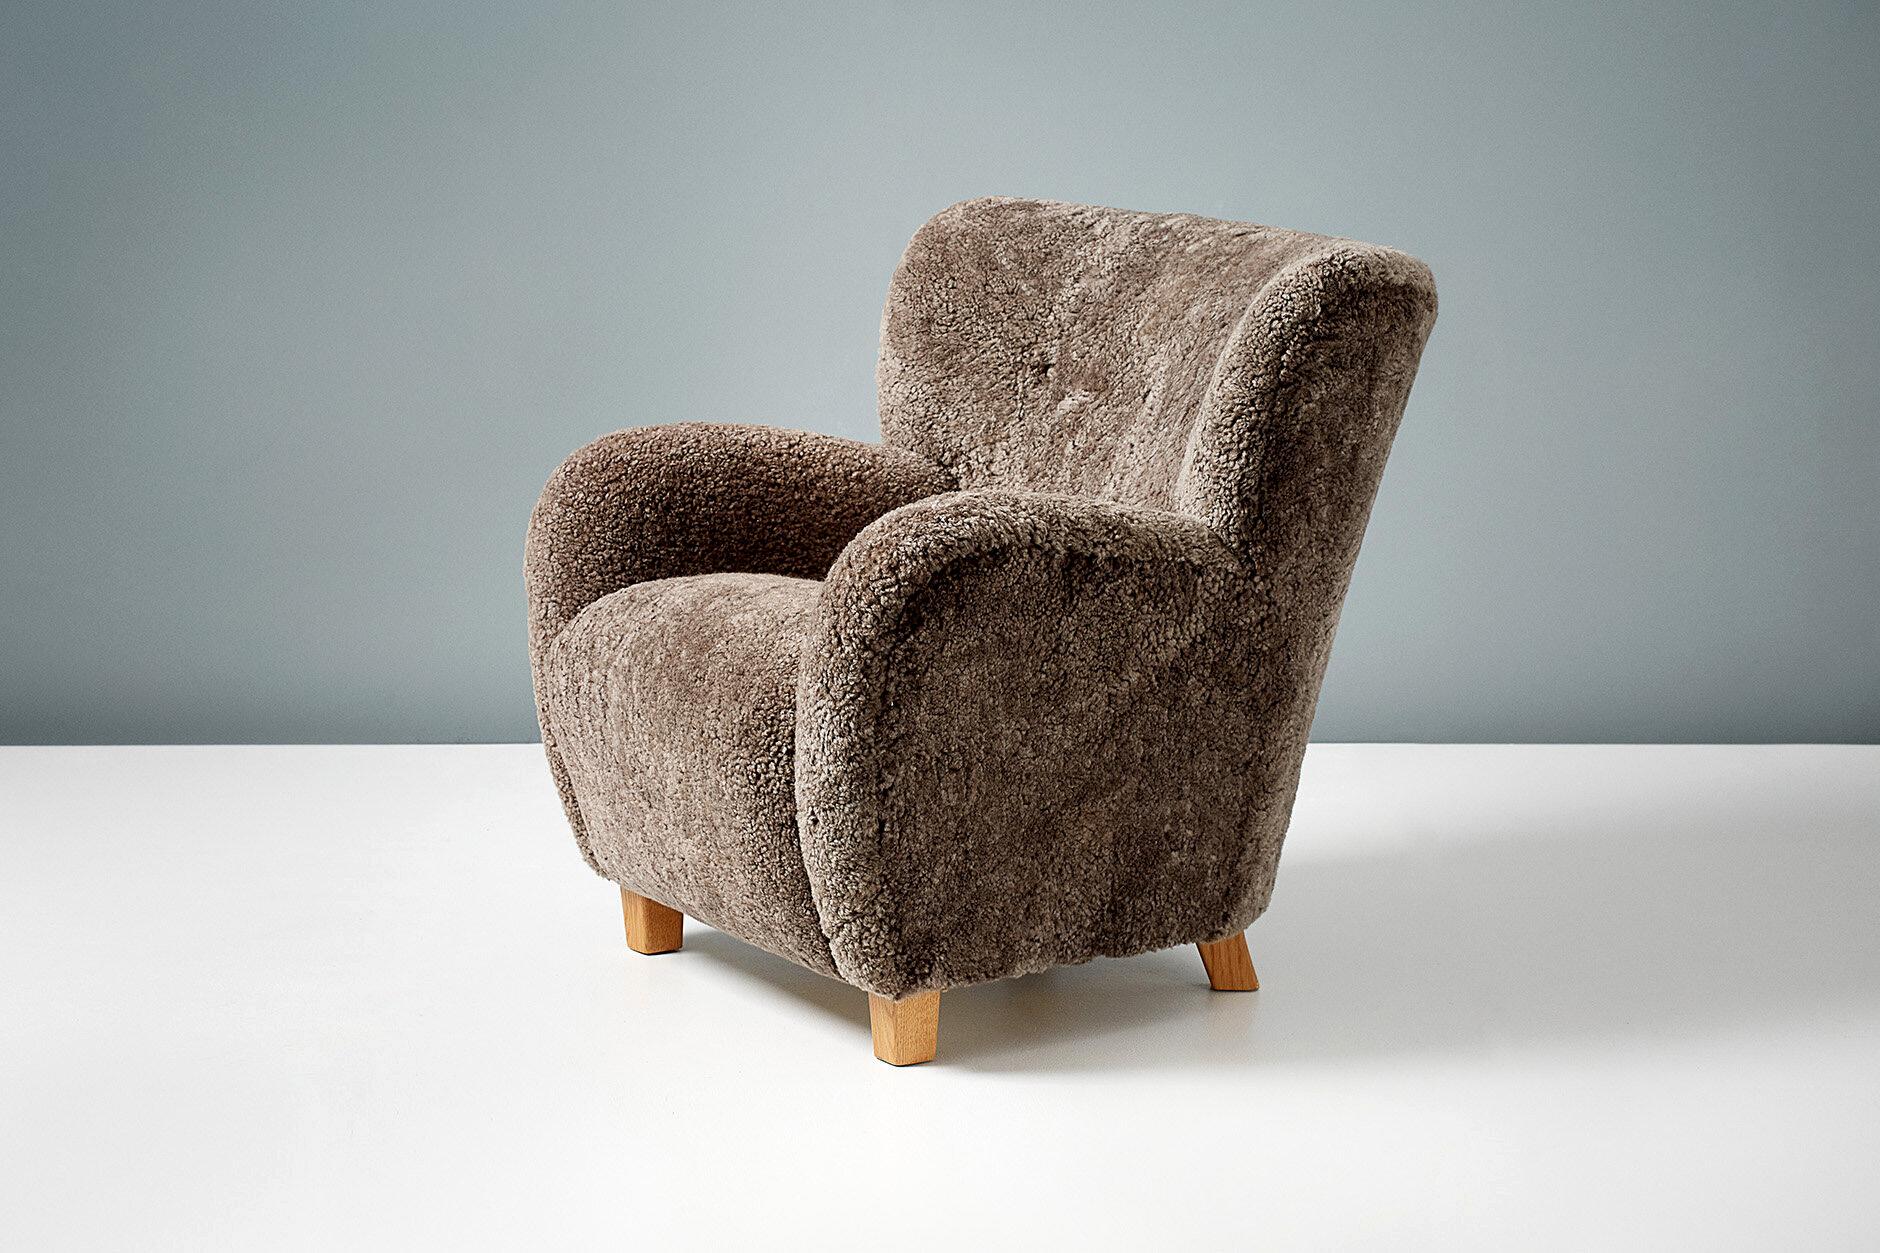 Dagmar Design - Karu lounge chair

These high-end lounge chairs are handmade to order at our workshops in the UK. The chair legs are available in oak or beechwood in a range of finishes. The frames are made from solid beechwood with a fully sprung